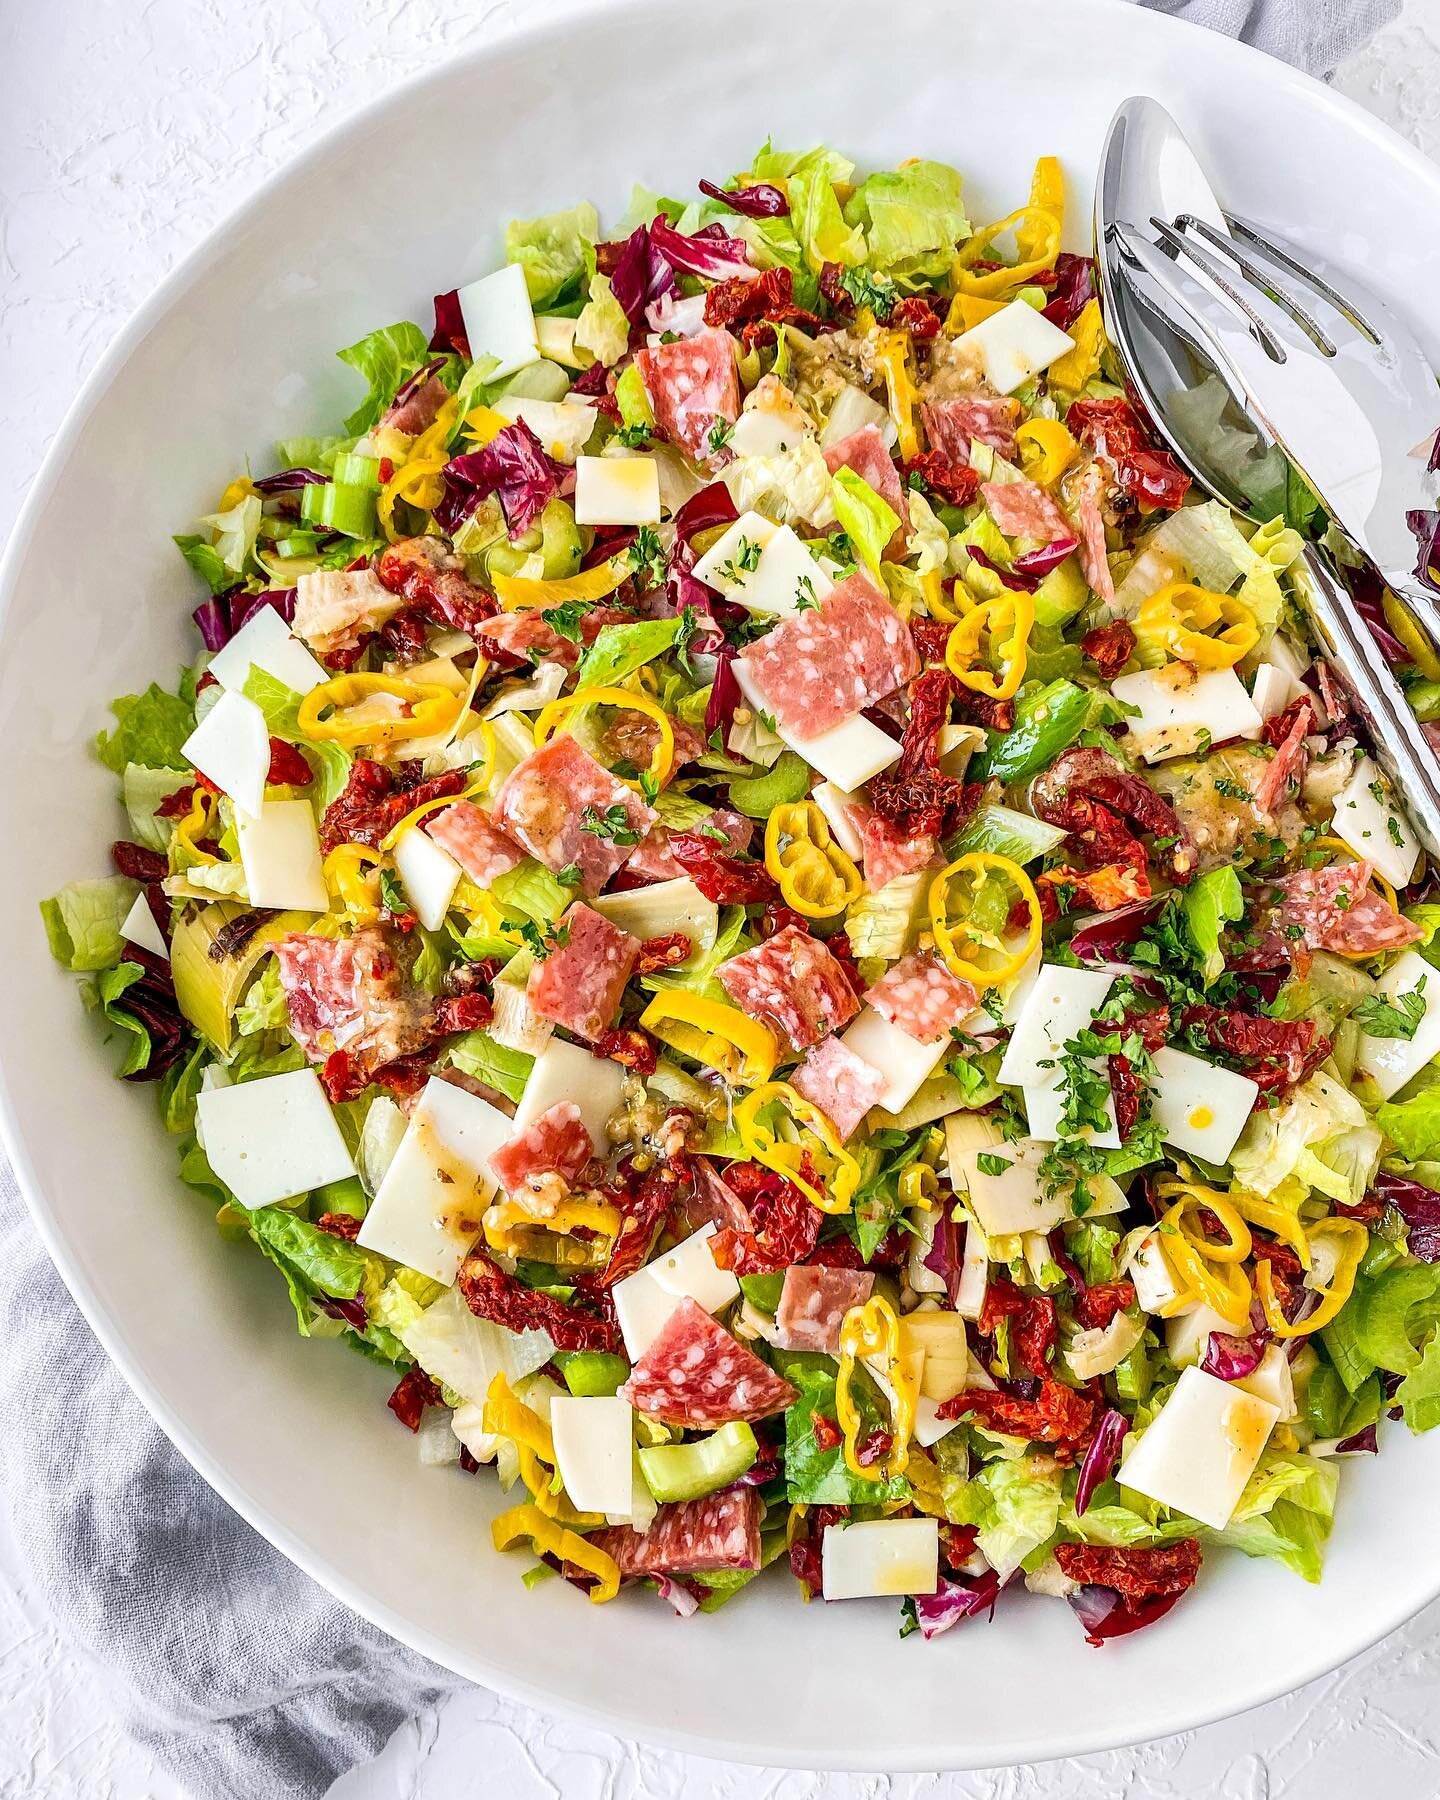 Looking for a fun new lunch idea? Try my ✨Chopped Antipasto Salad✨ You can totally change up what you put in this salad based on what you have on hand. Save post for recipe!

For the salad

2 hearts of romaine, chopped
1 c radicchio, chopped
4 stalks